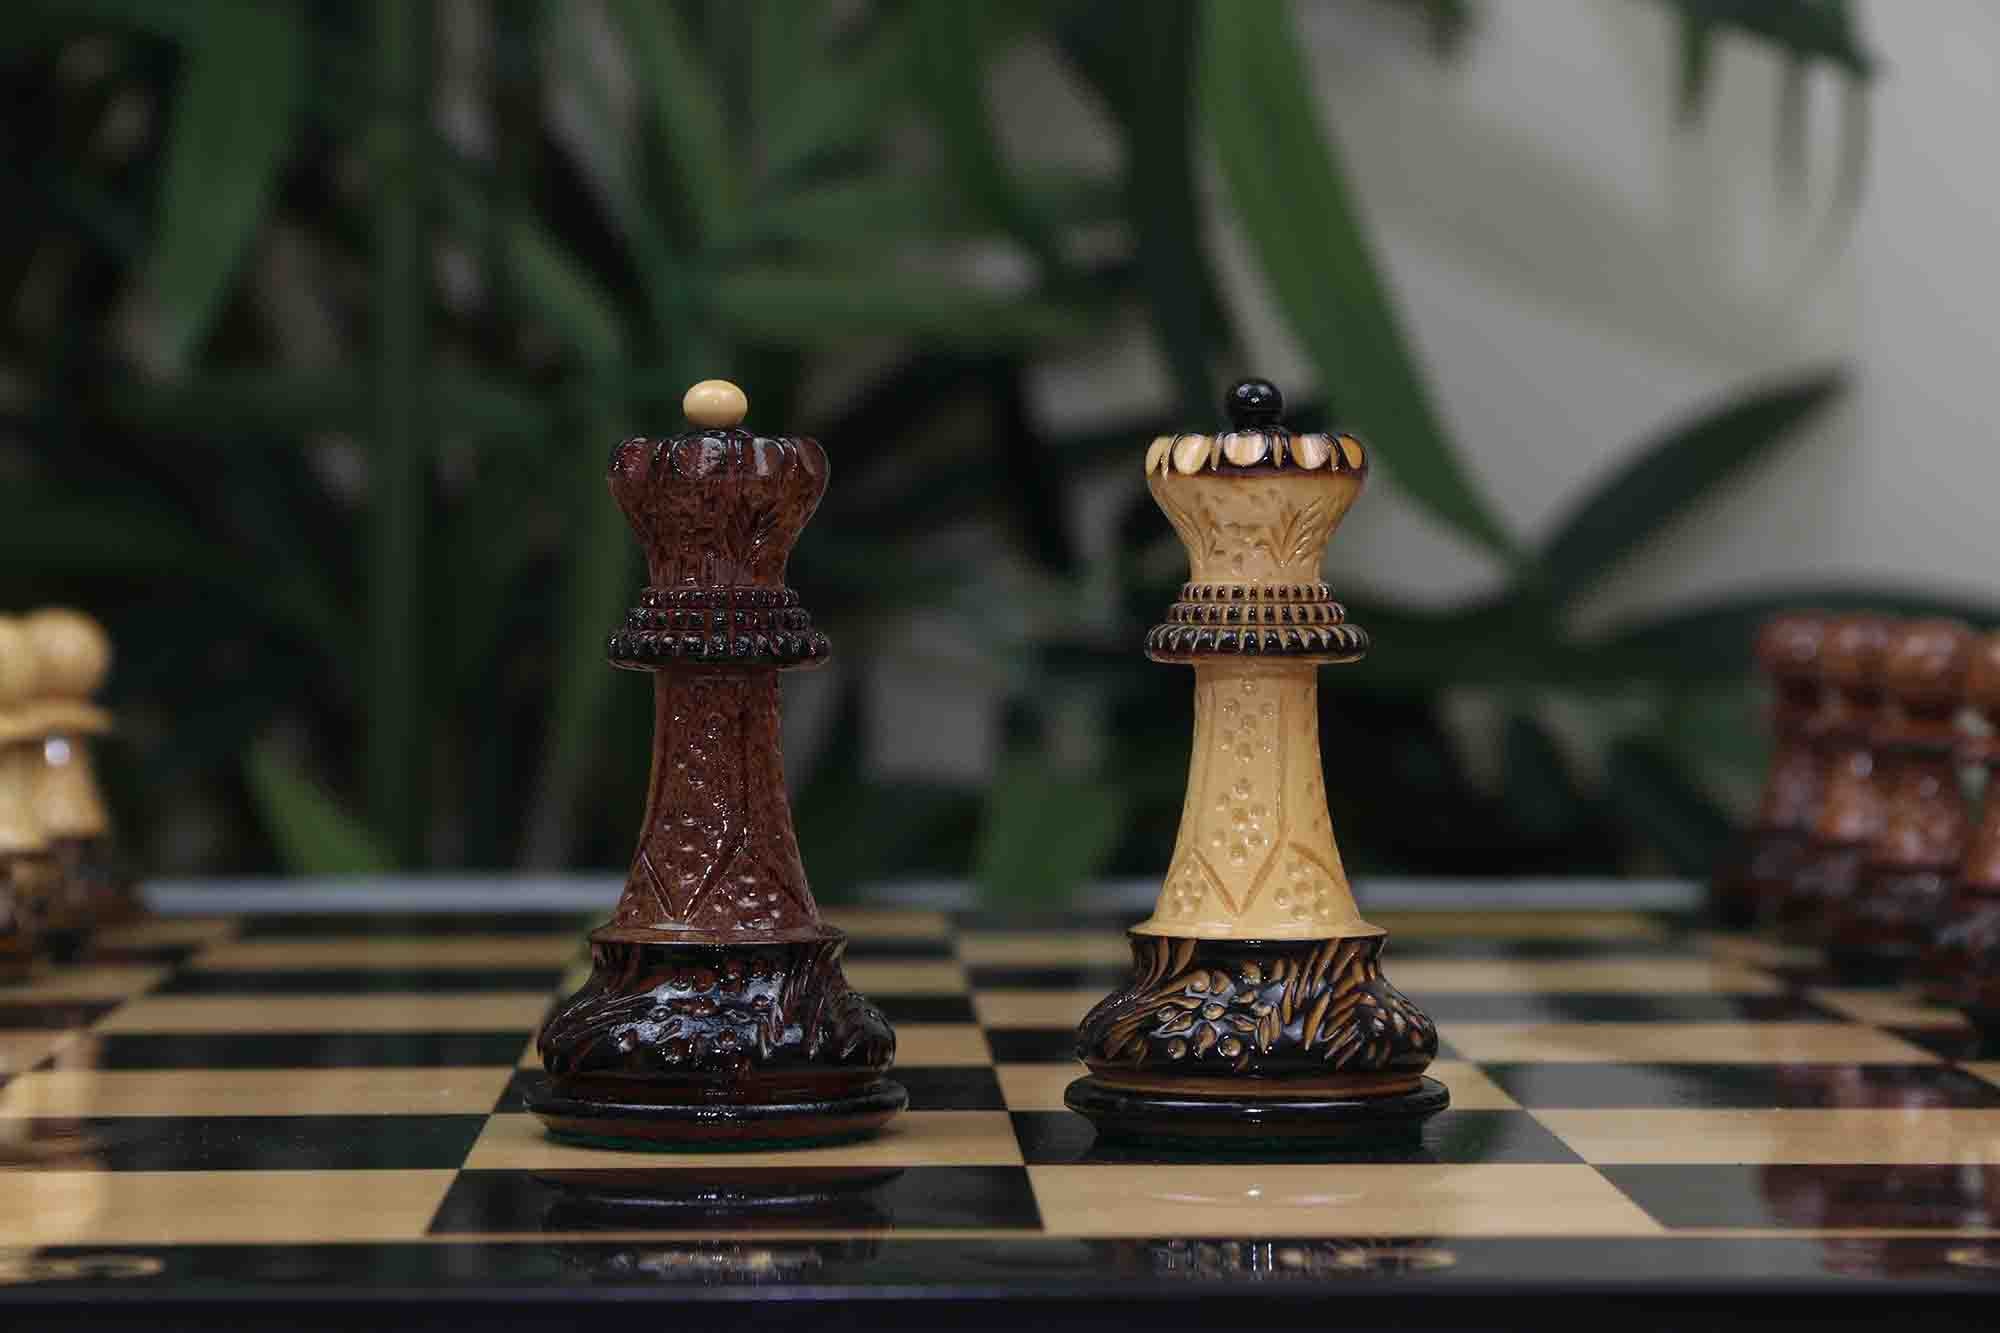 Zagreb '59 Series Luxury Chessmen in Lacquered Burnt Golden Rose/ Boxwood - 3.75" King Height